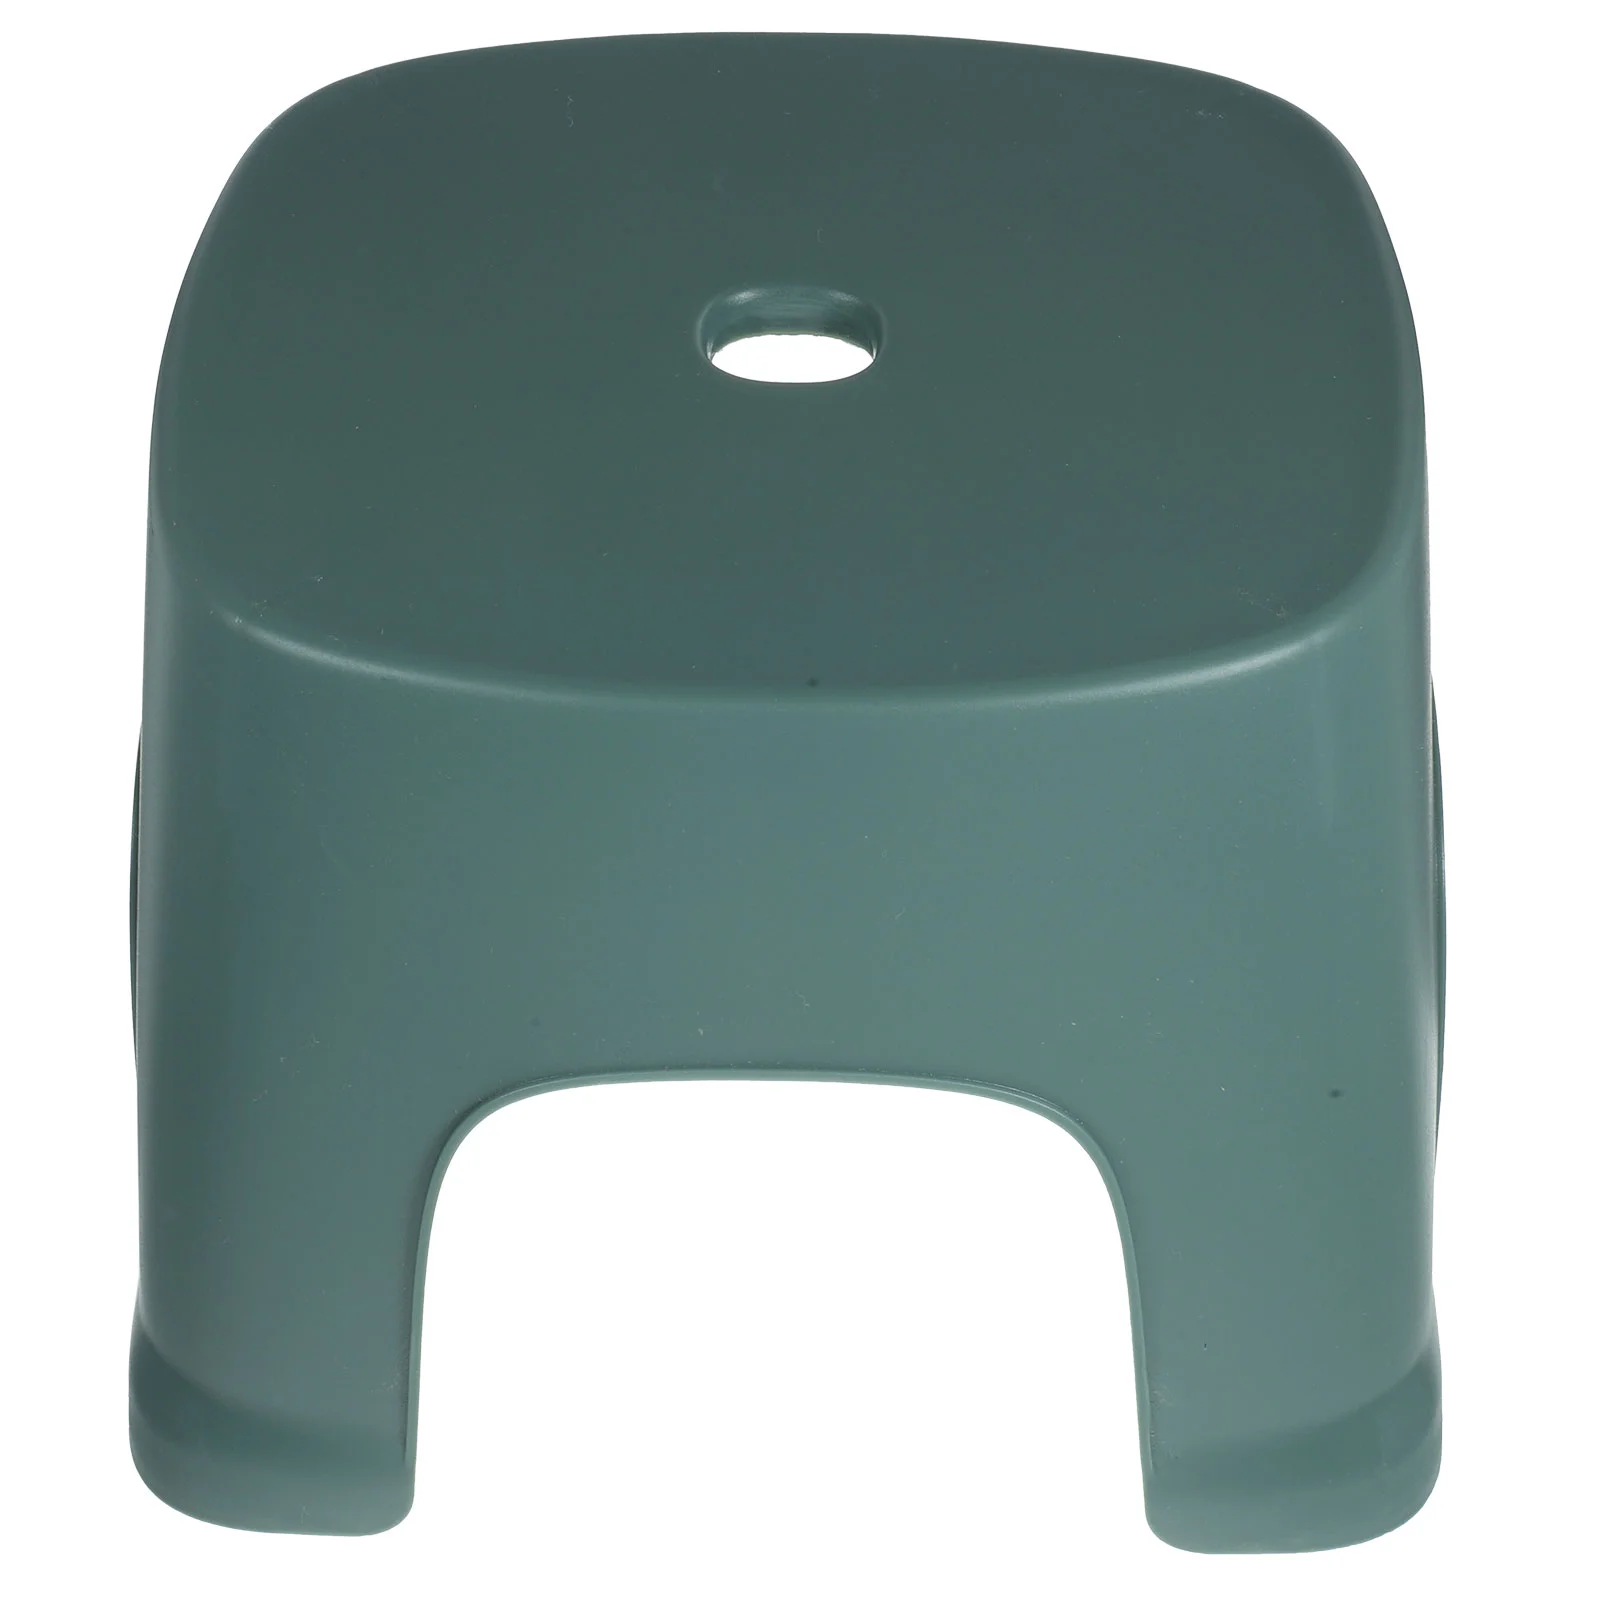 

Low Stool Toddler Potty Plastic Foot Aldult Bathroom Toilet Footstool for Pvc Step Kids Stepping Office Toddlers